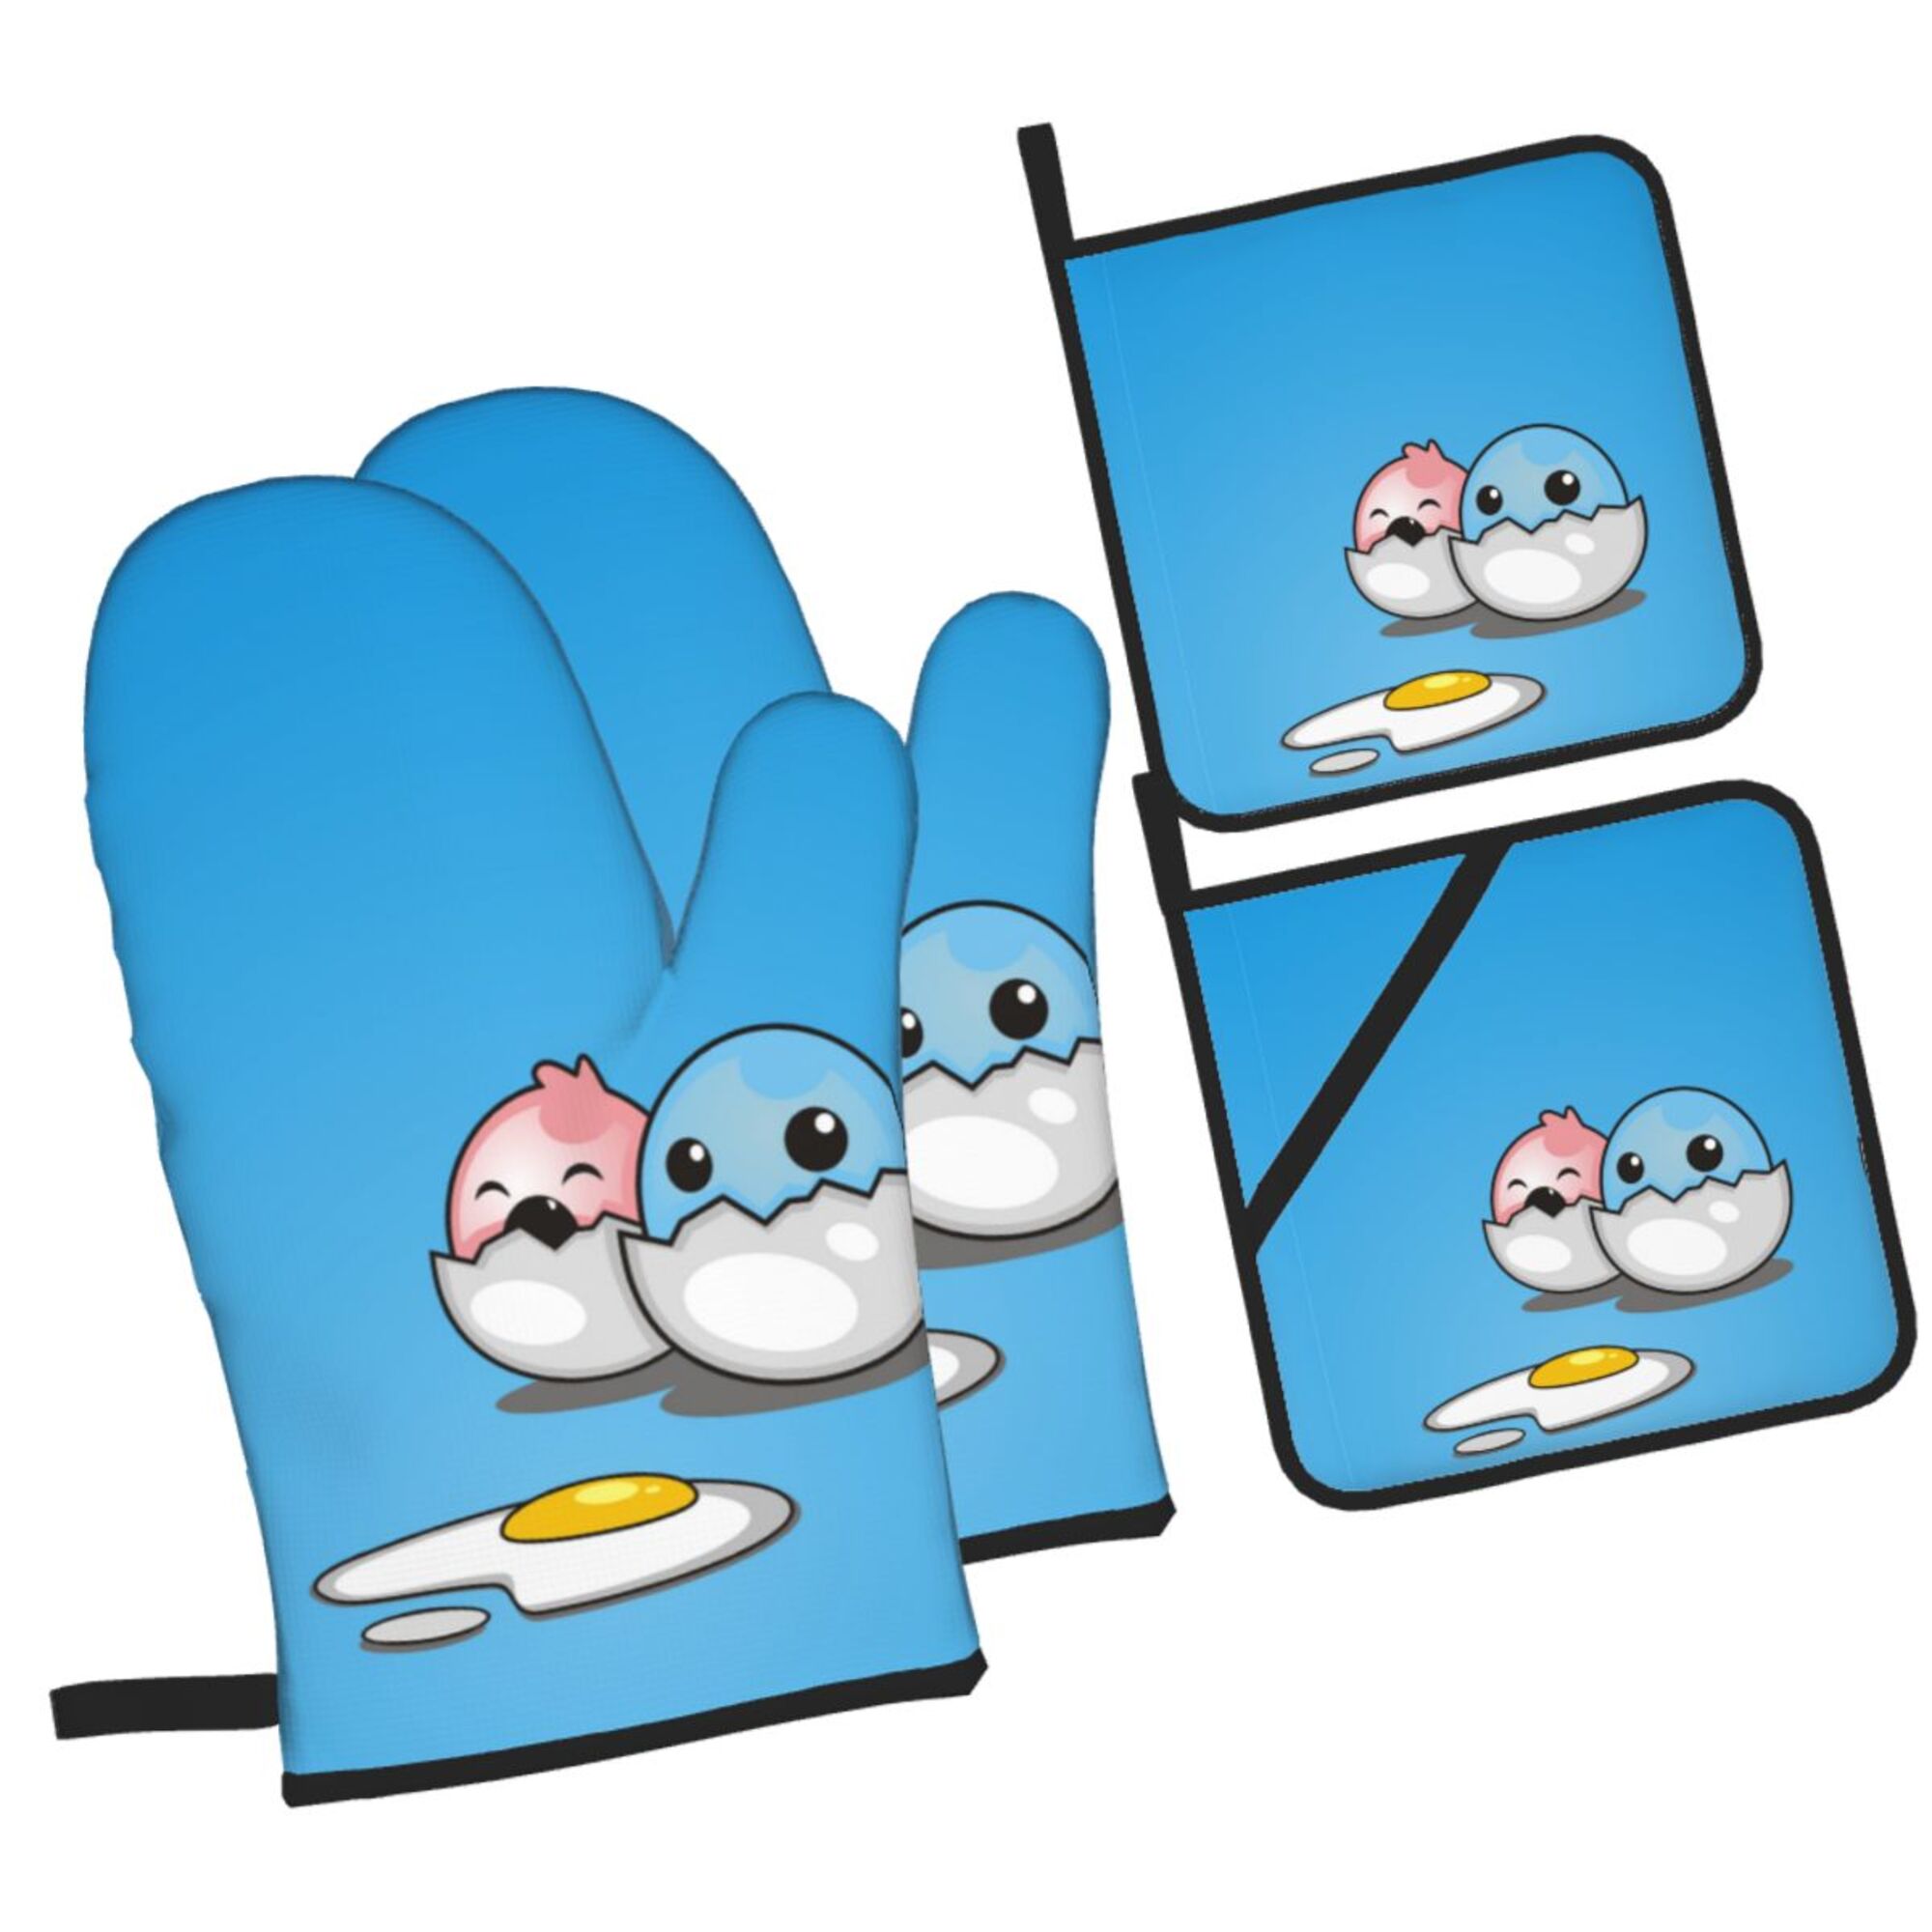 Funny Cute Blue Egg Oven Mitts and Pot Holders Sets Baking Sets for Kitchen Bbq Gloves Heat Resistant Cooking Cartoon Mascot 4 Pieces - image 1 of 8